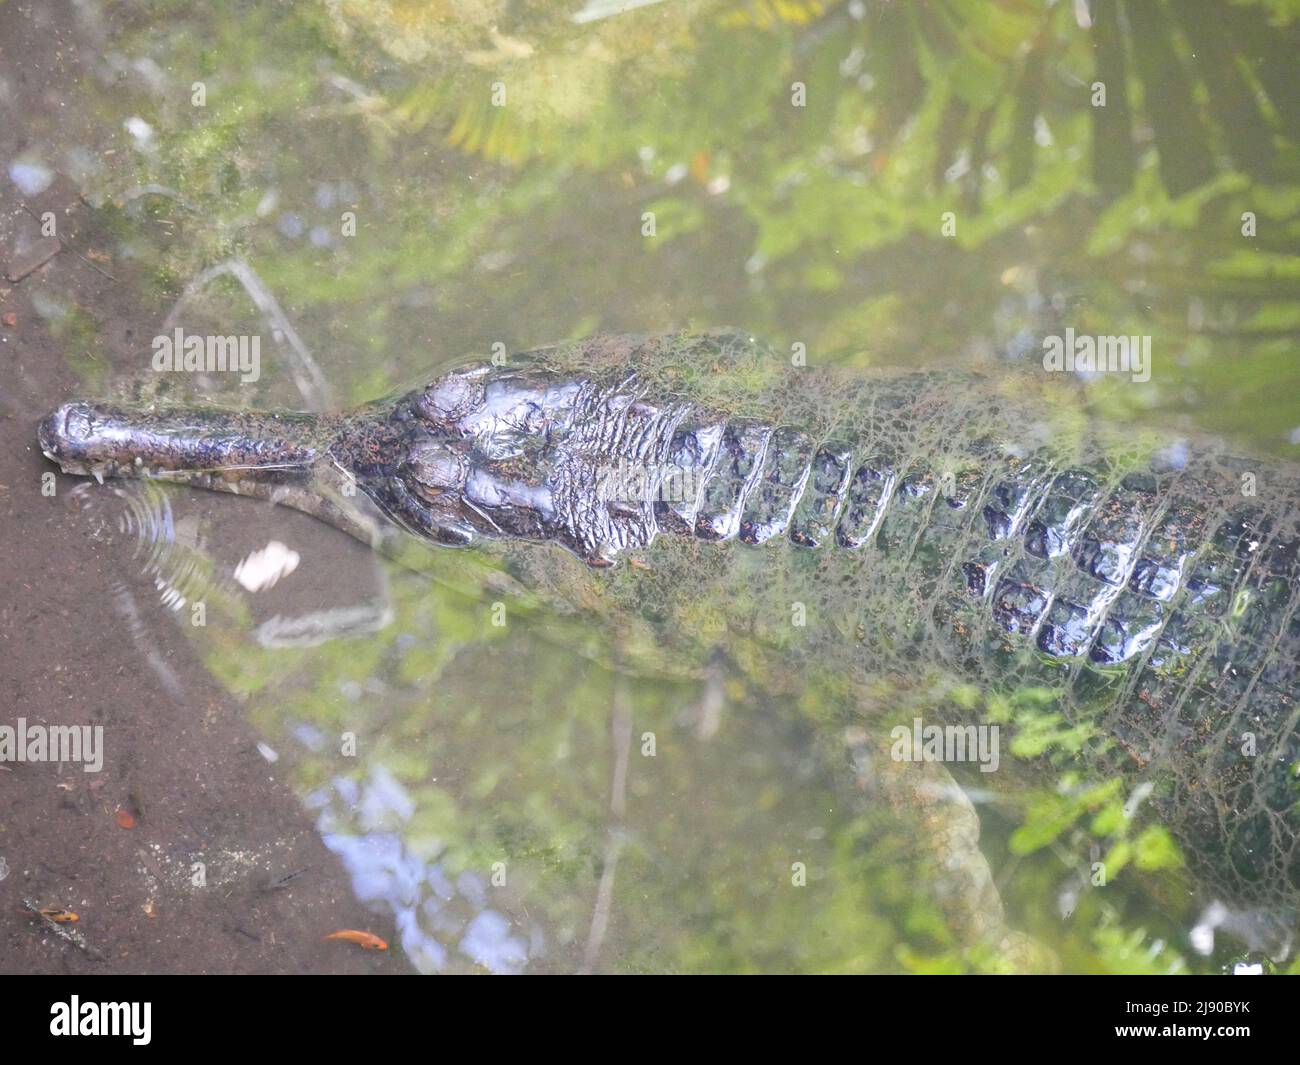 Gharial also known as gavial or fish-eating crocodile resting in water Stock Photo